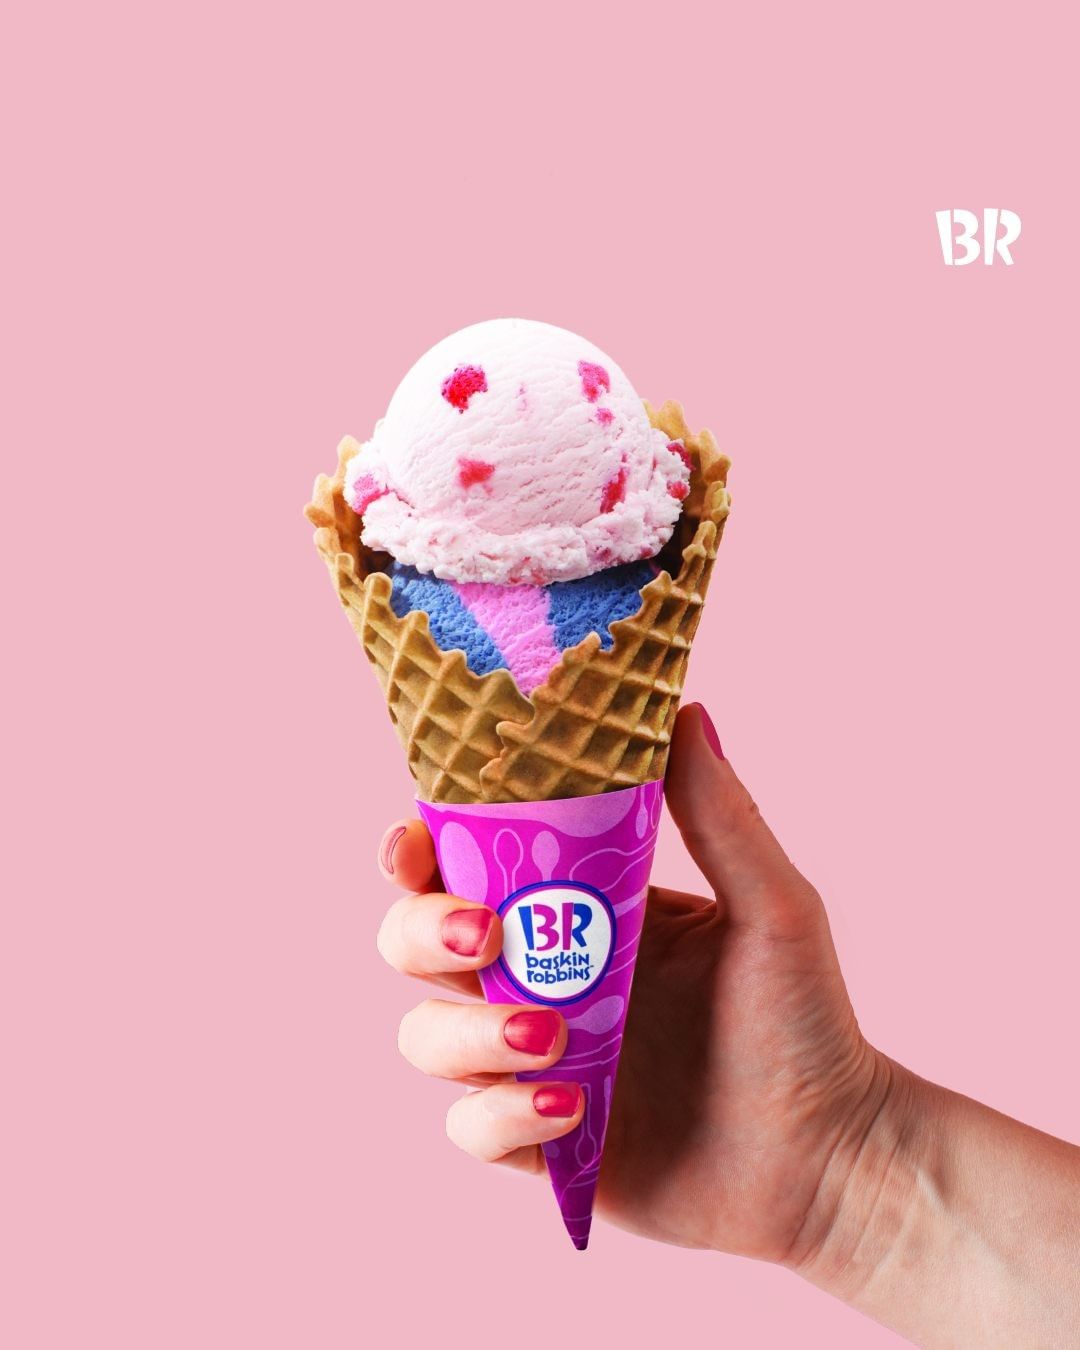 Women's Day Special at Baskin-Robbins